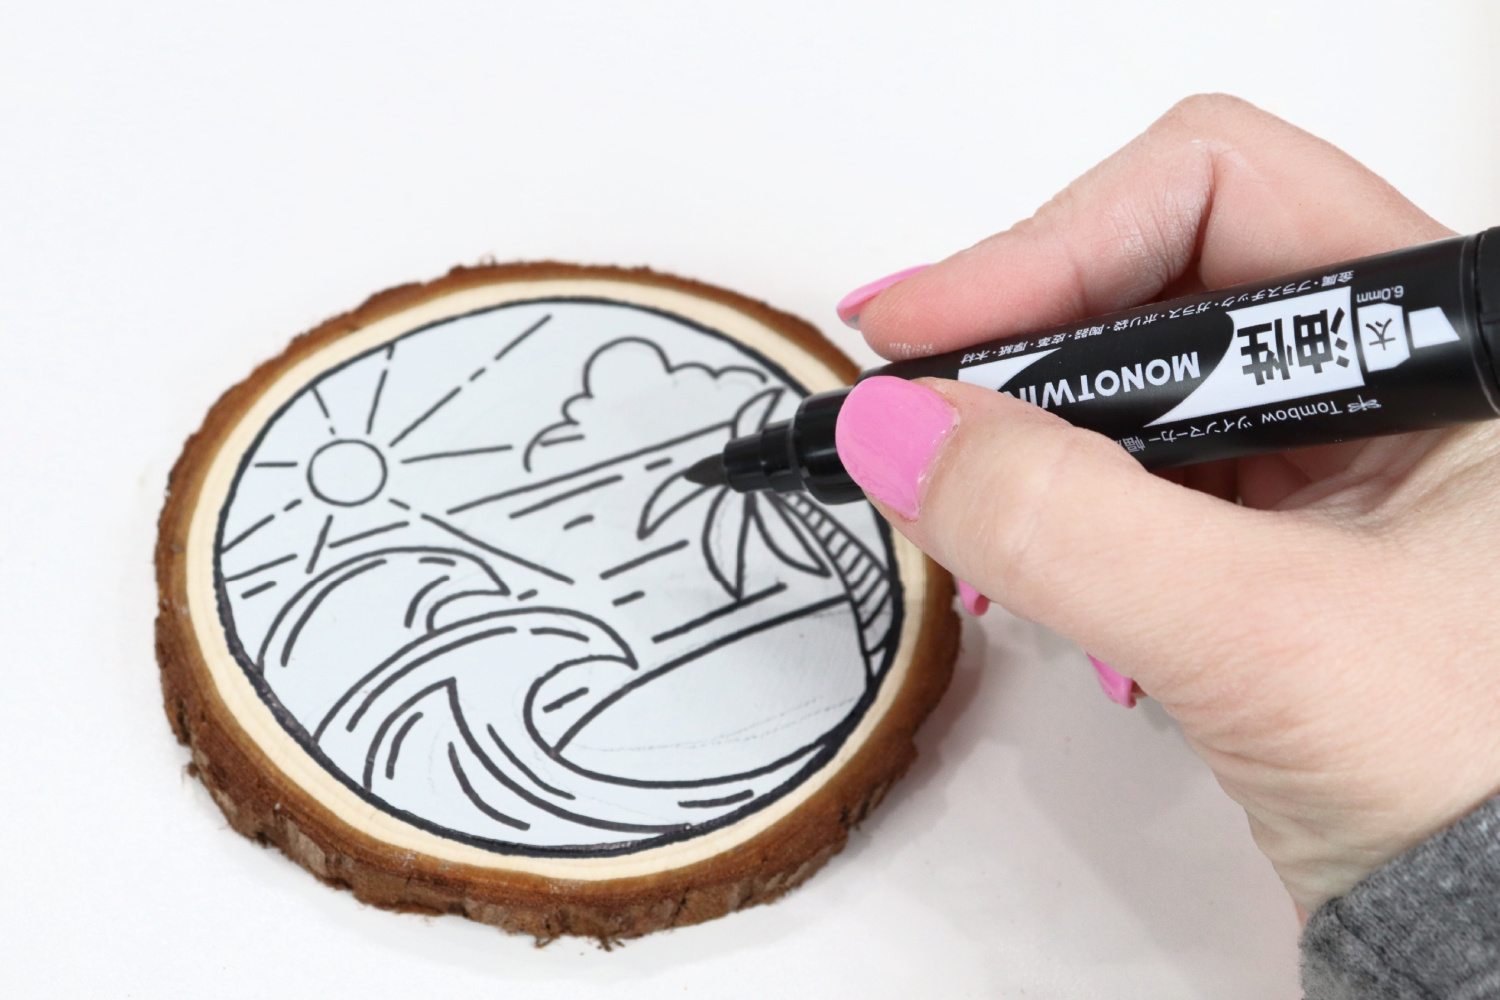 Image contains Amy’s hand holding a black MONOTwin marker and drawing on a painted wood slice.